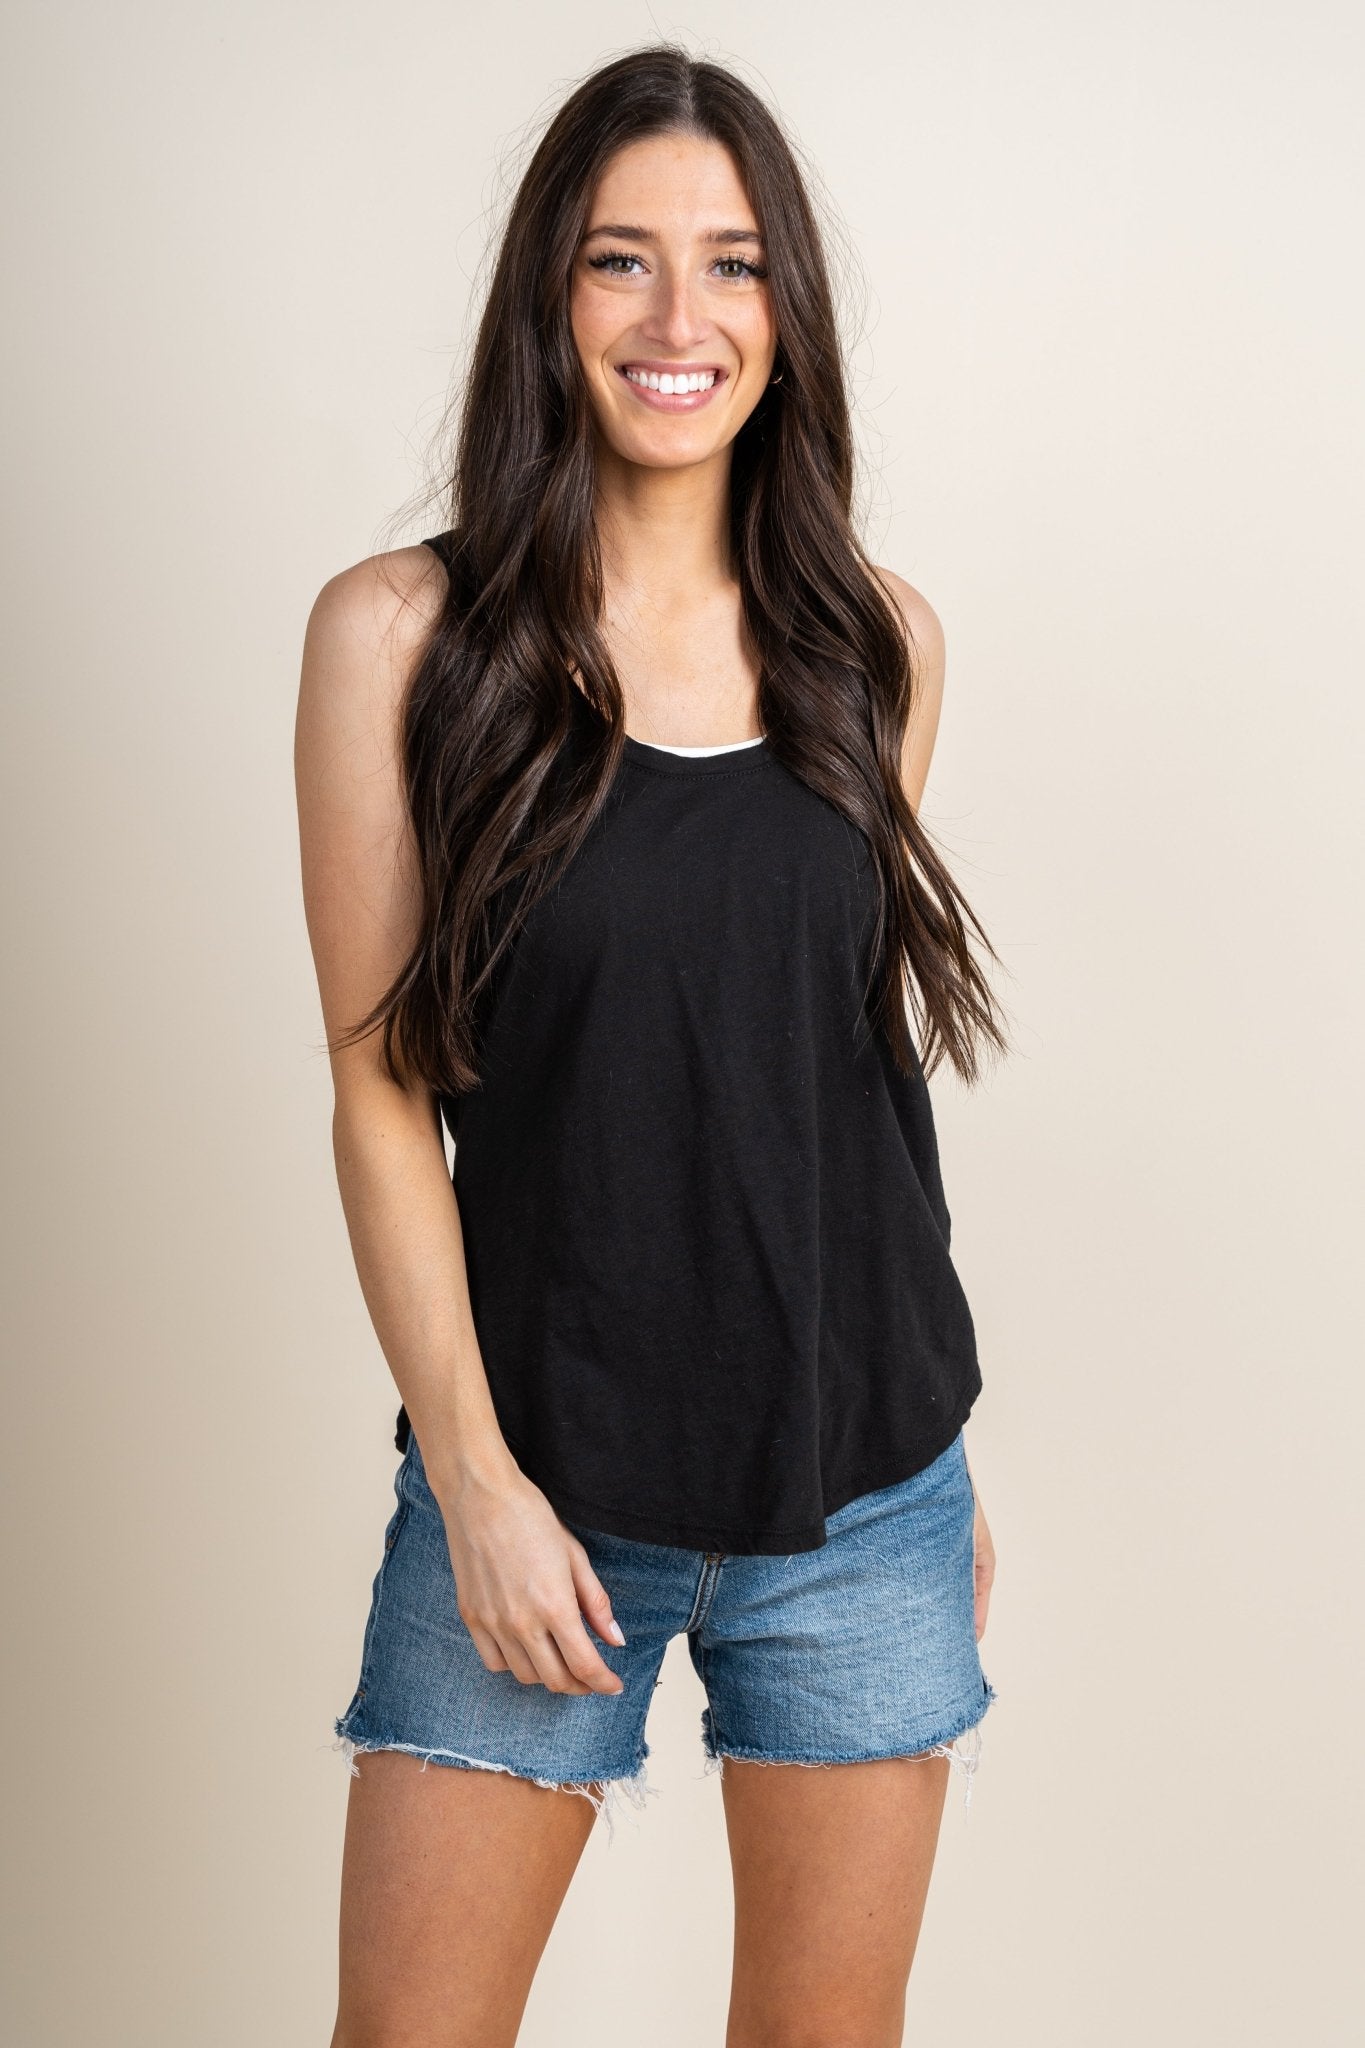 Z Supply relaxed slub tank top black - Z Supply Tank Top - Z Supply Tops, Dresses, Tanks, Tees, Cardigans, Joggers and Loungewear at Lush Fashion Lounge